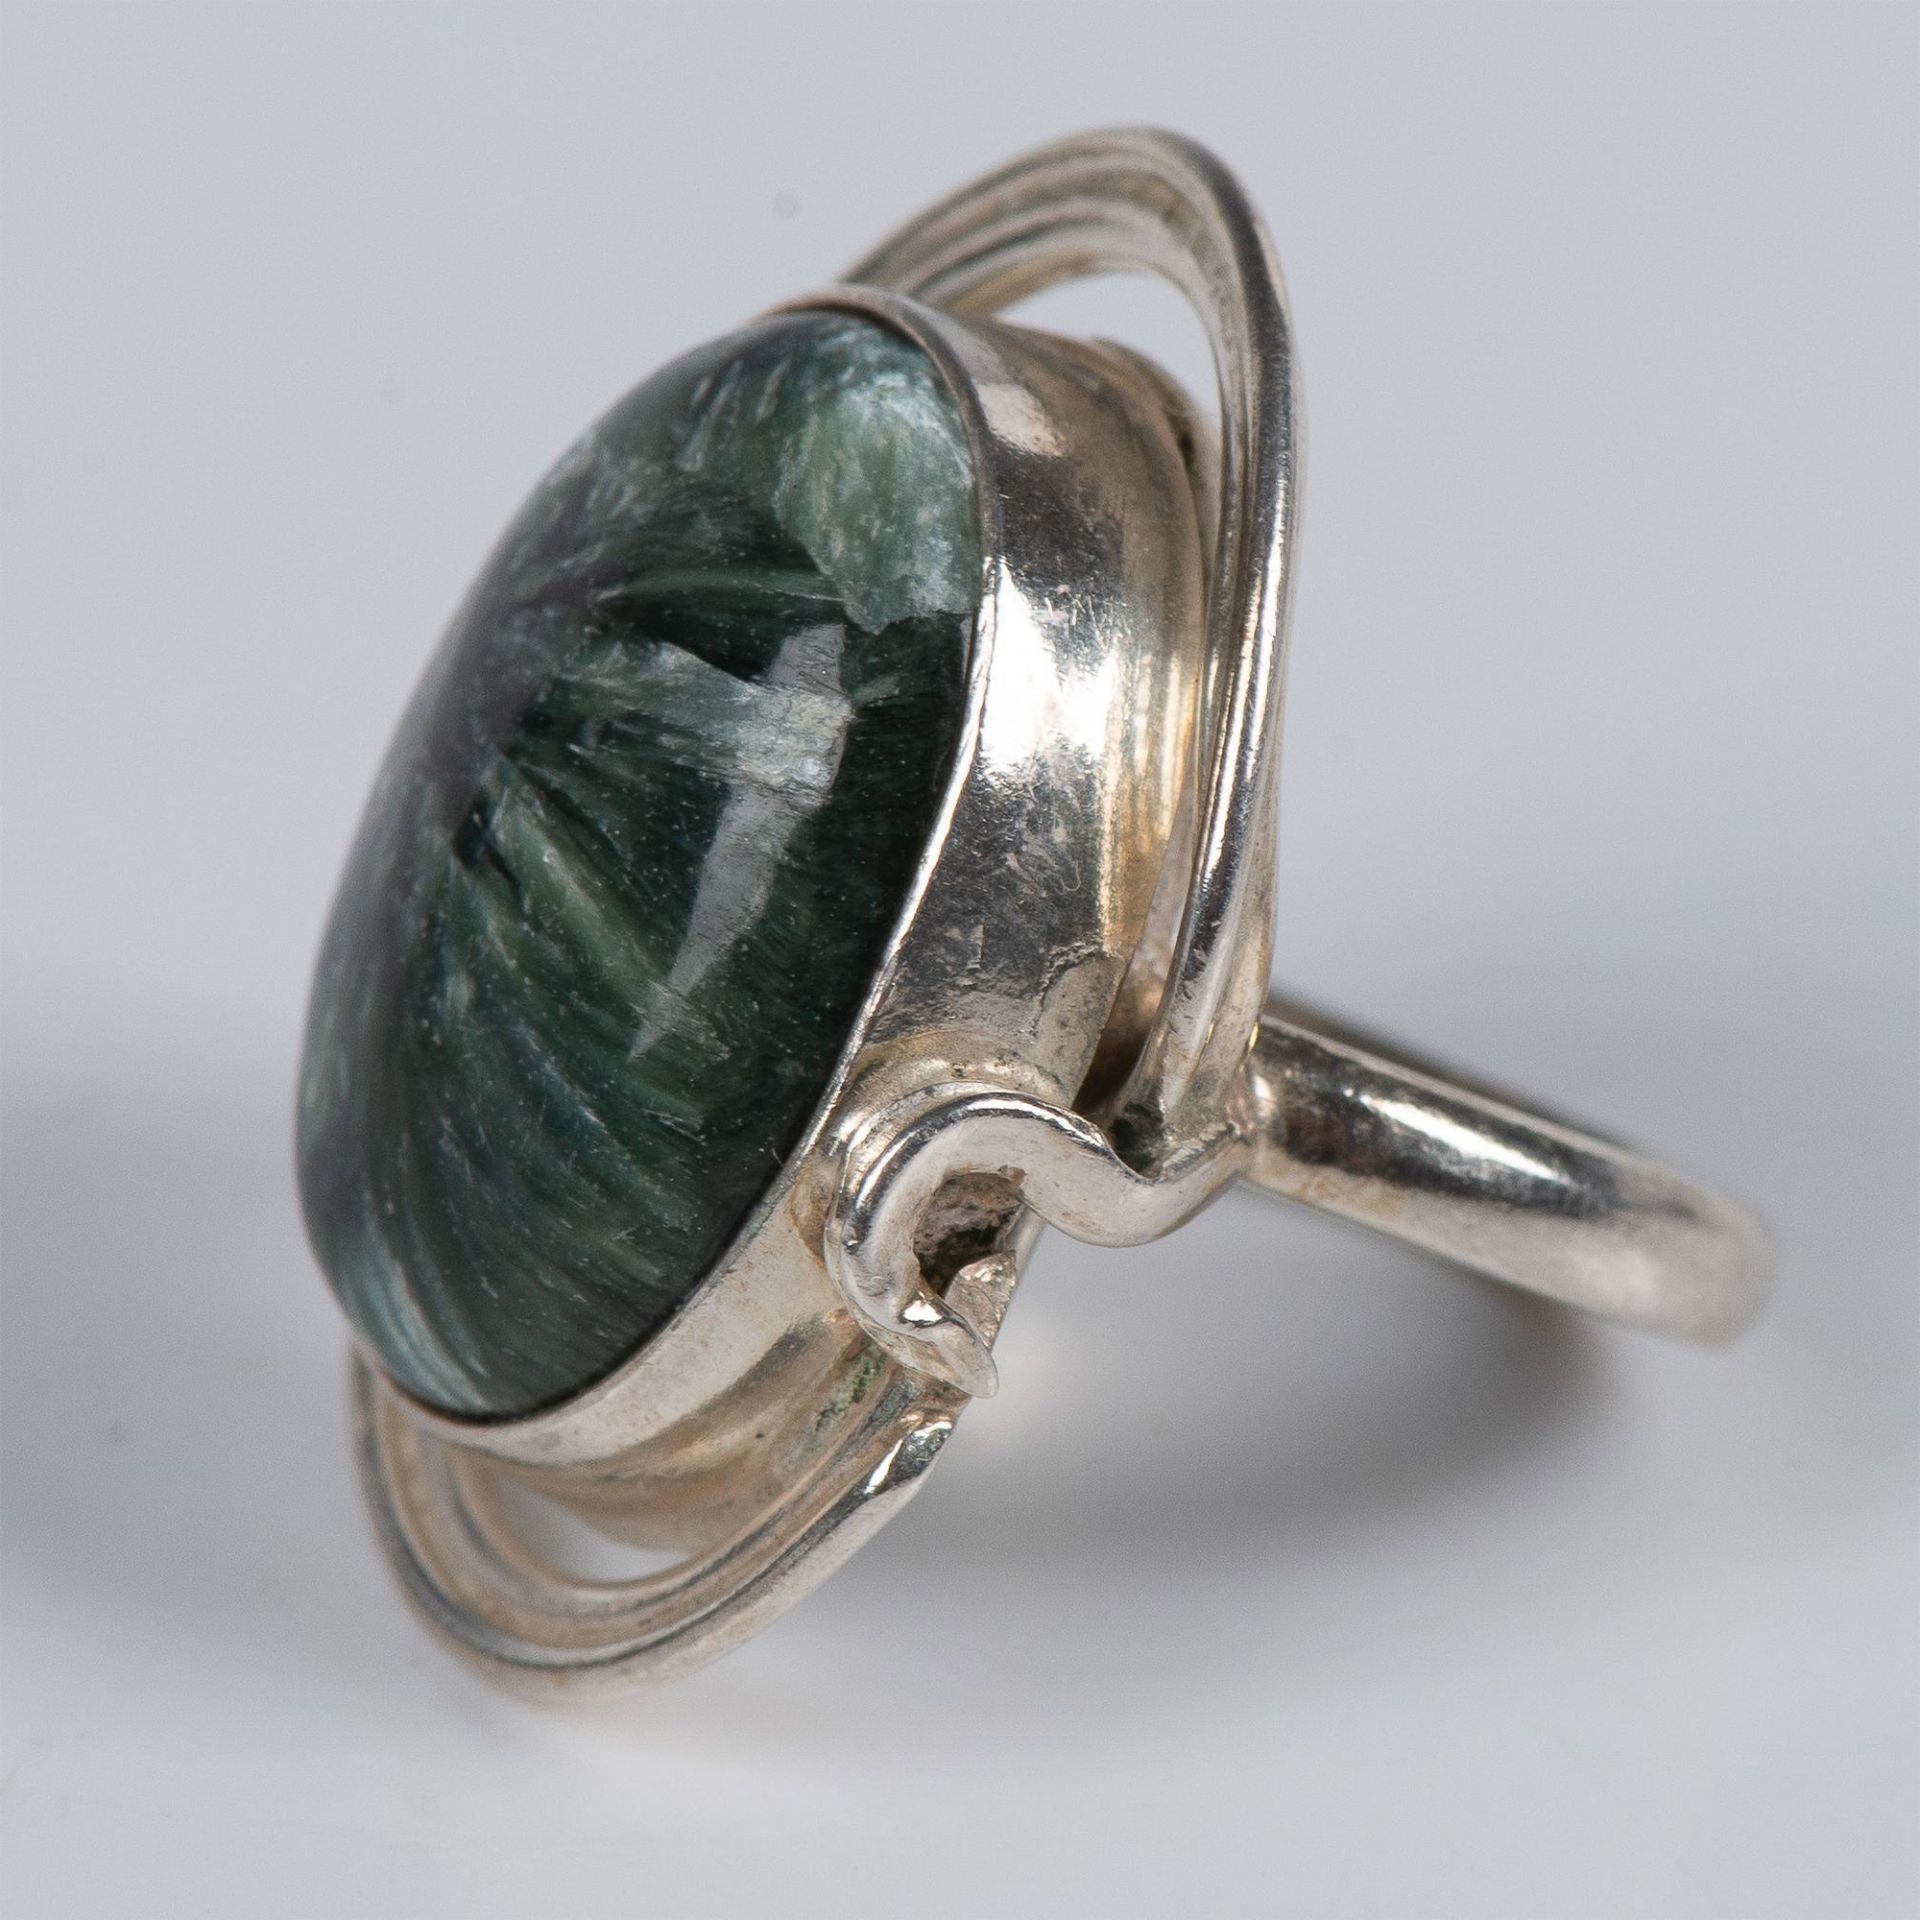 Native American Sterling Silver & Green Seraphinite Ring - Image 2 of 5